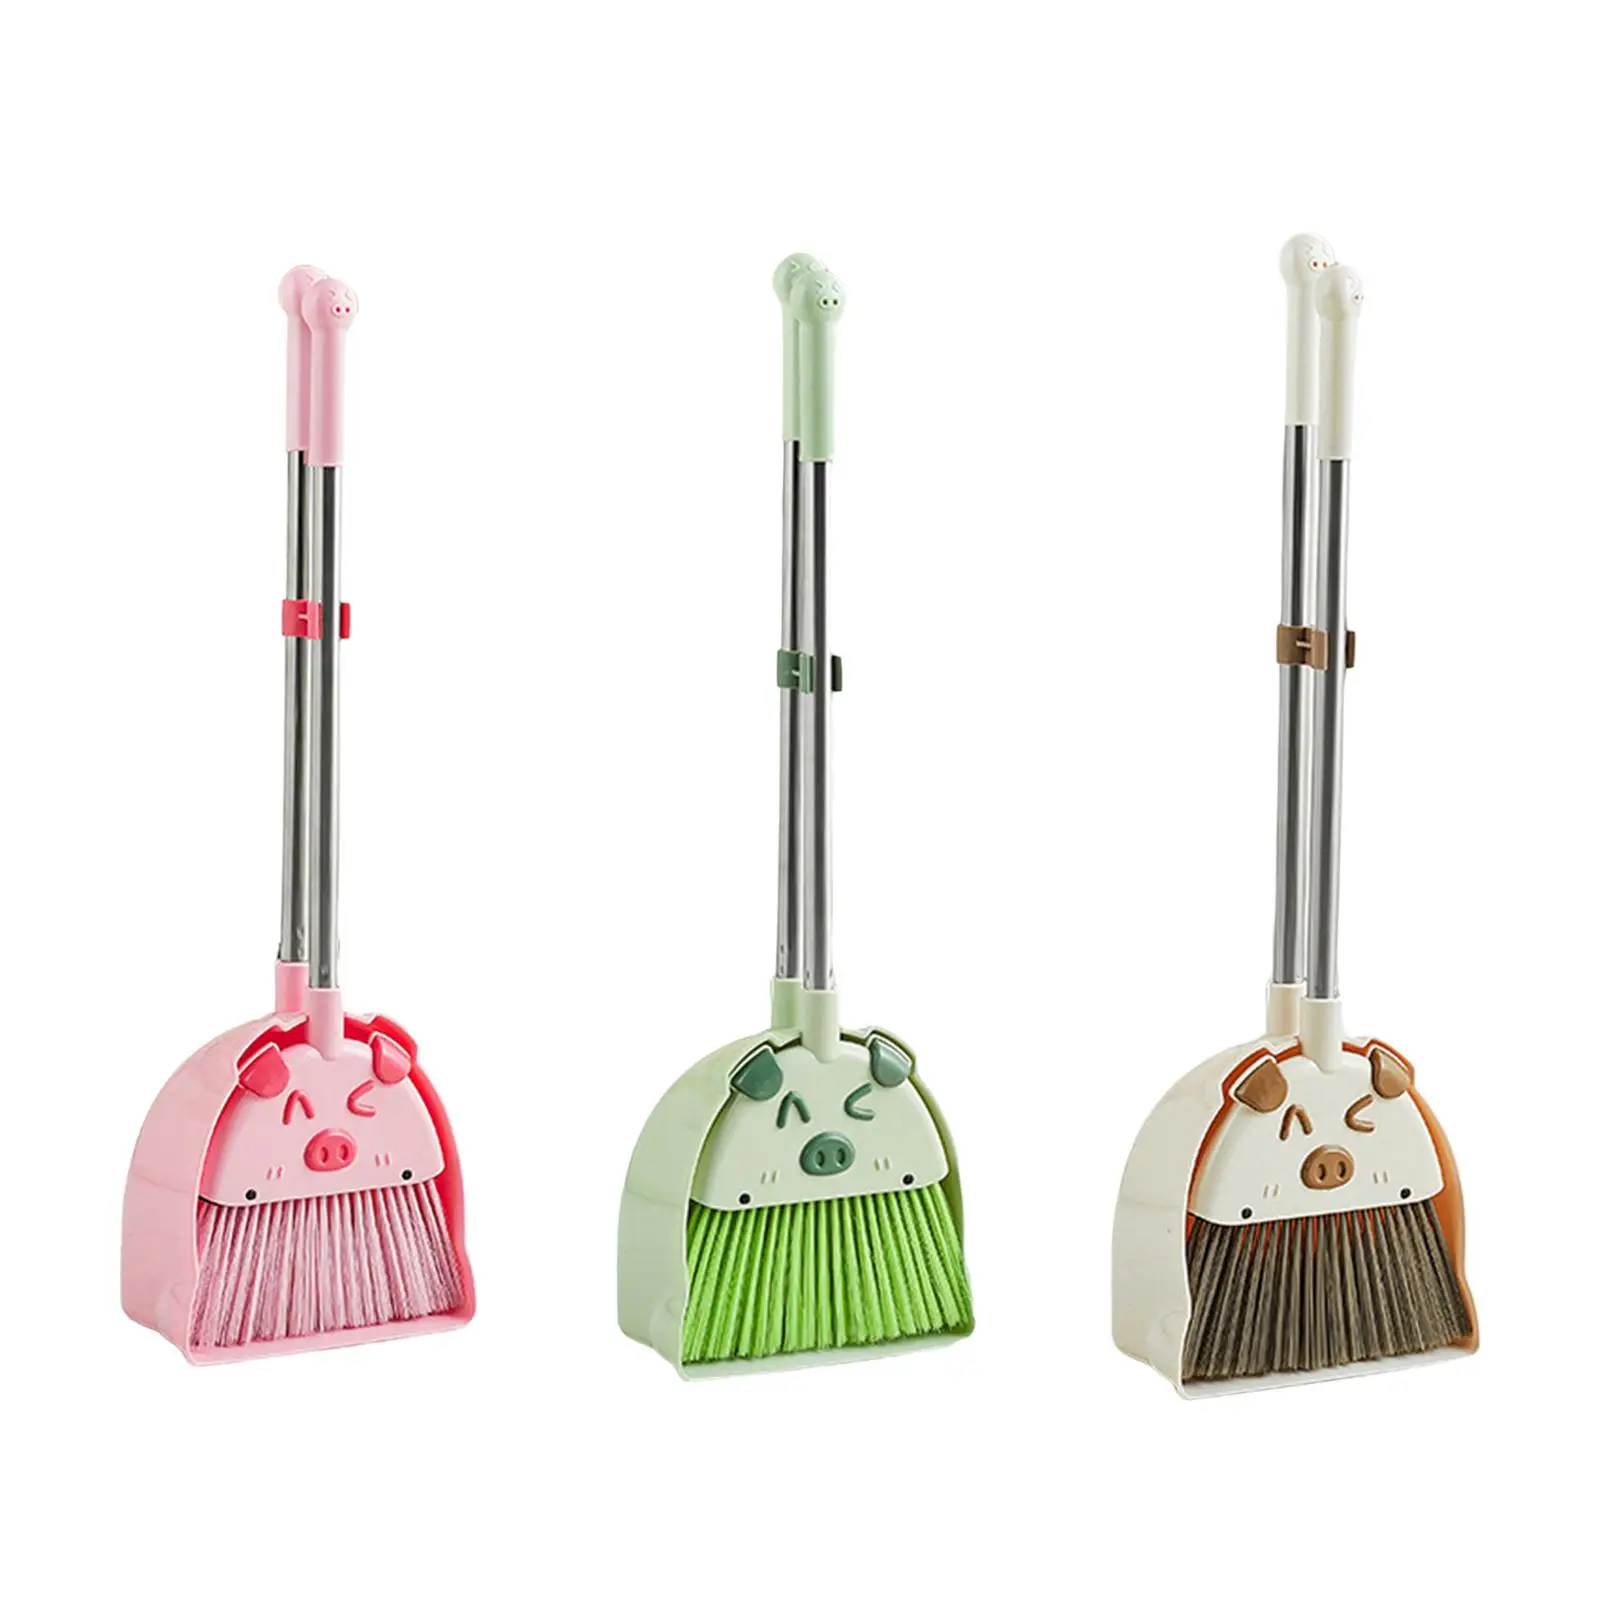 Household Mini Kids Broom and Dustpan Set Toddlers Cleaning Toys Set for Boys